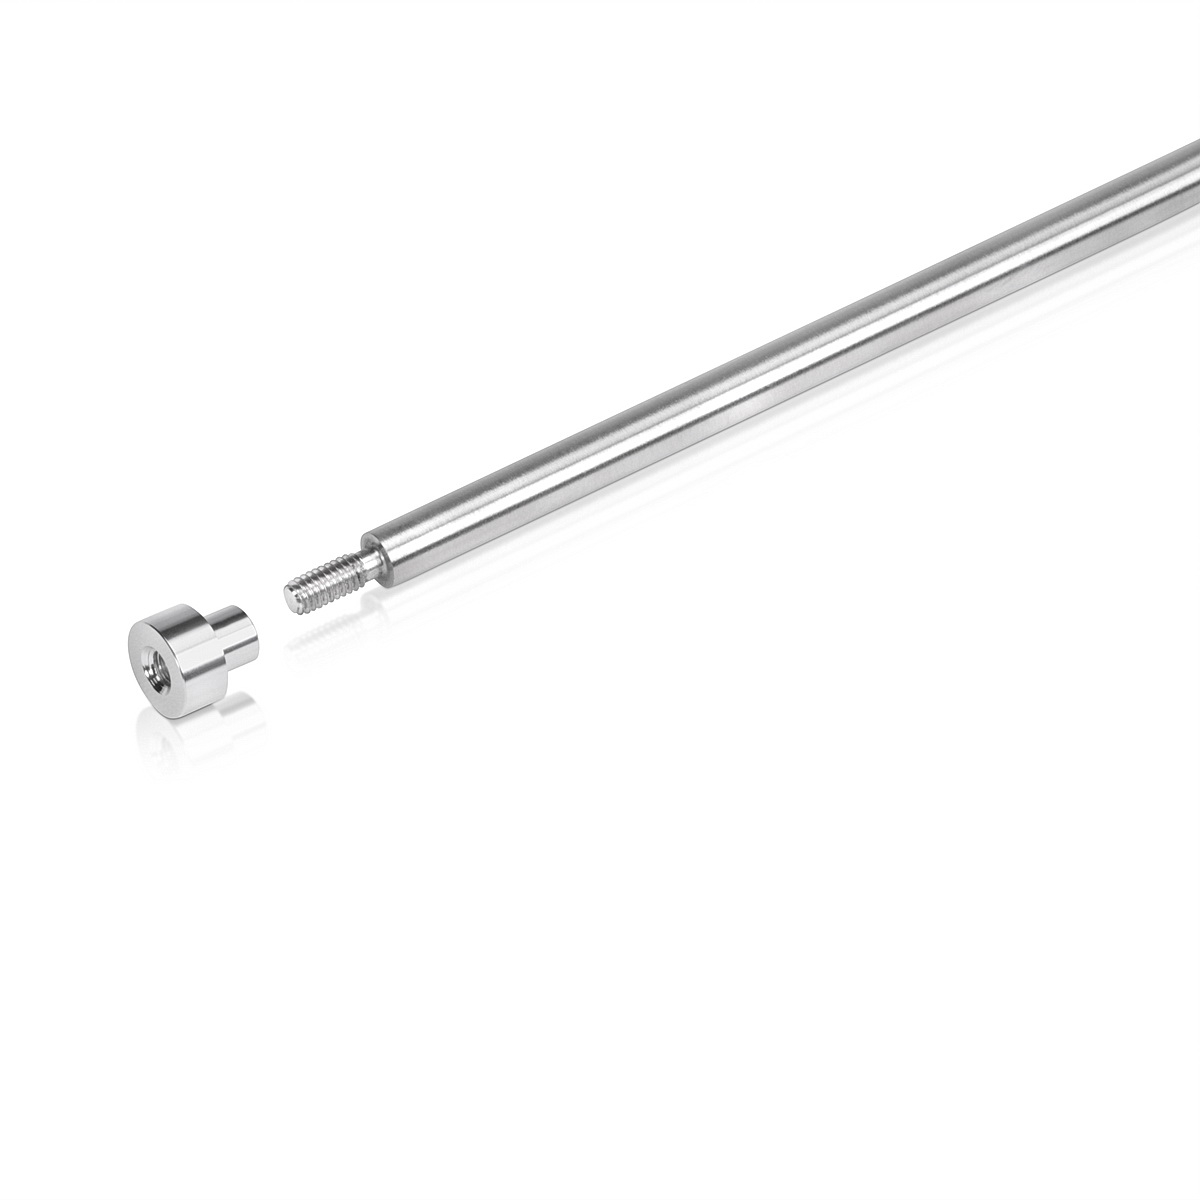 Nut Support (Threaded M4) For Ceiling Rod Suspended Aluminum Kit  (Sold without Rod)